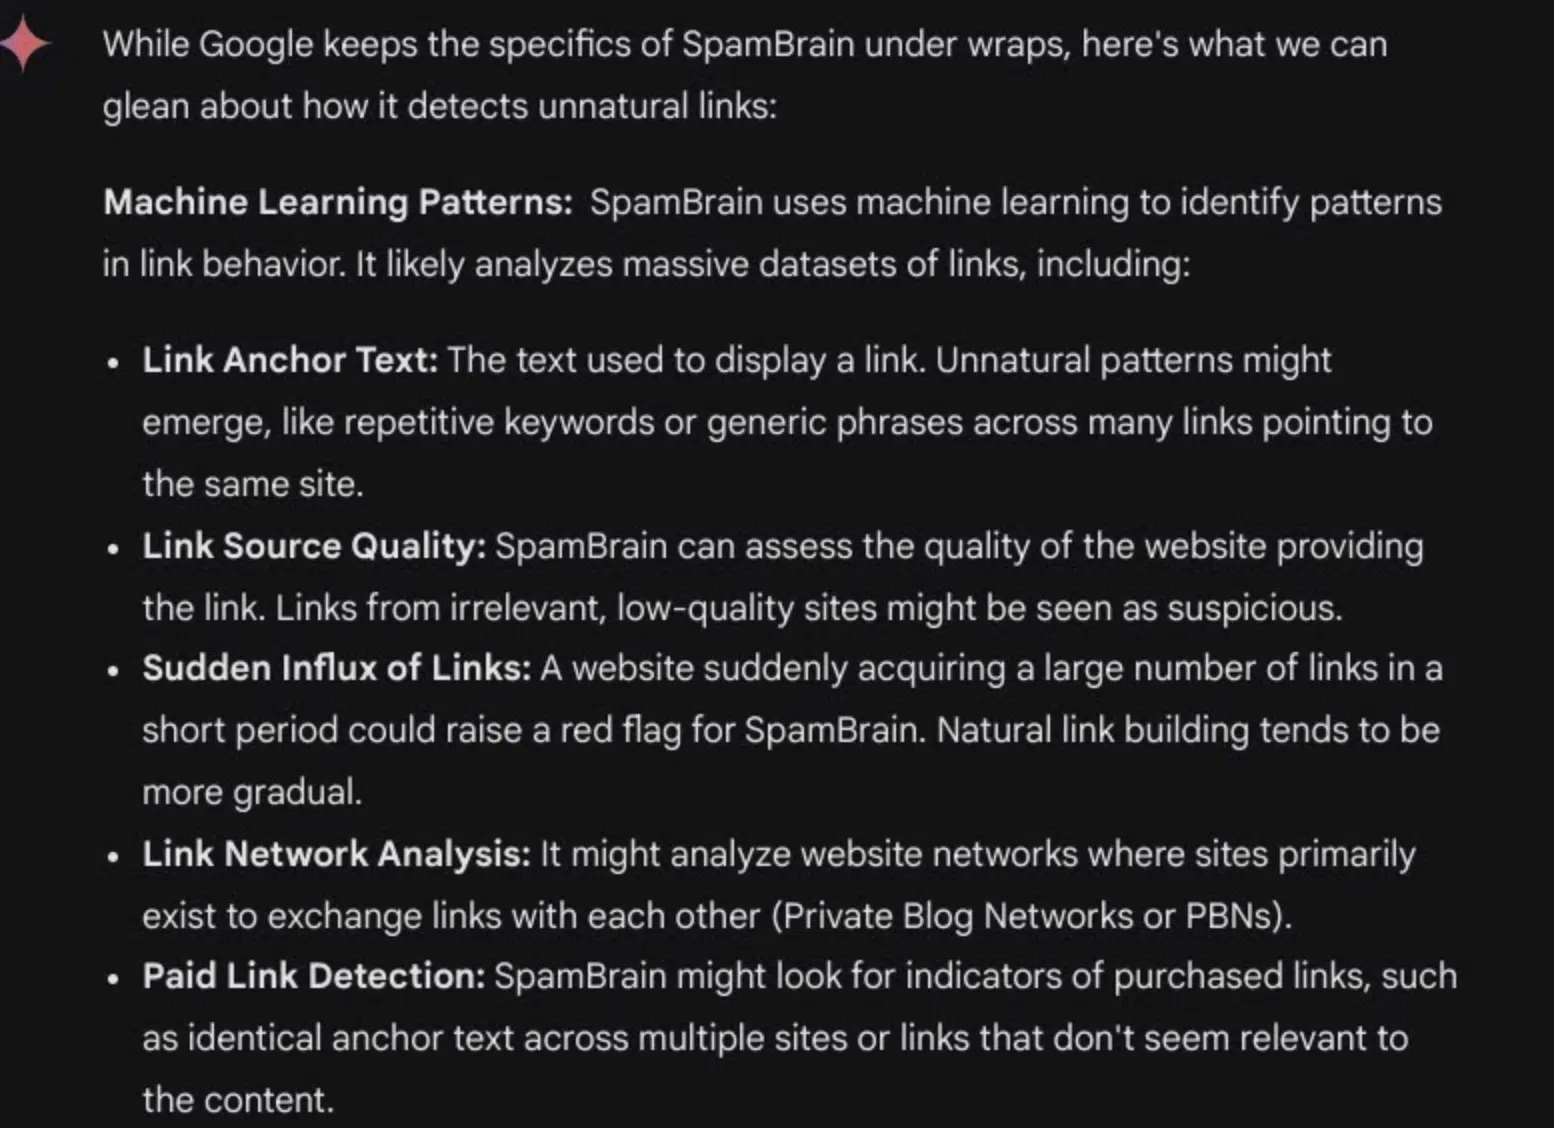 SpamBrain and unnatural links according to Gemini